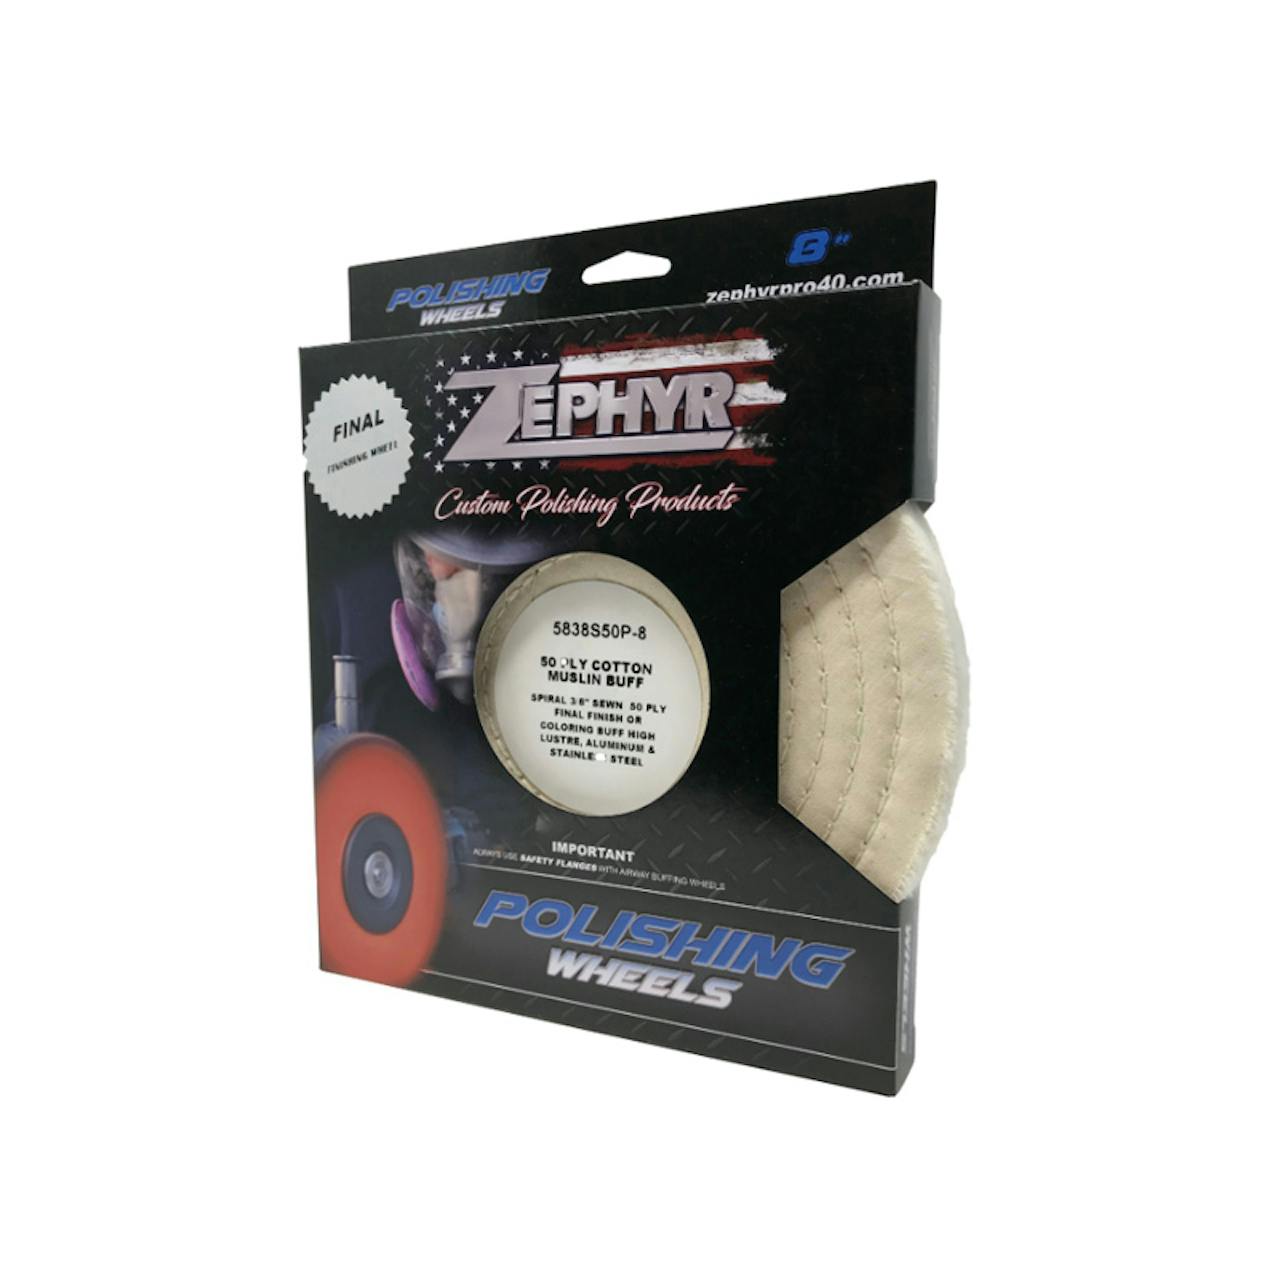 Zephyr 583RS50P-6 Cotton Muslin 6 50-Ply White Buffing Wheel